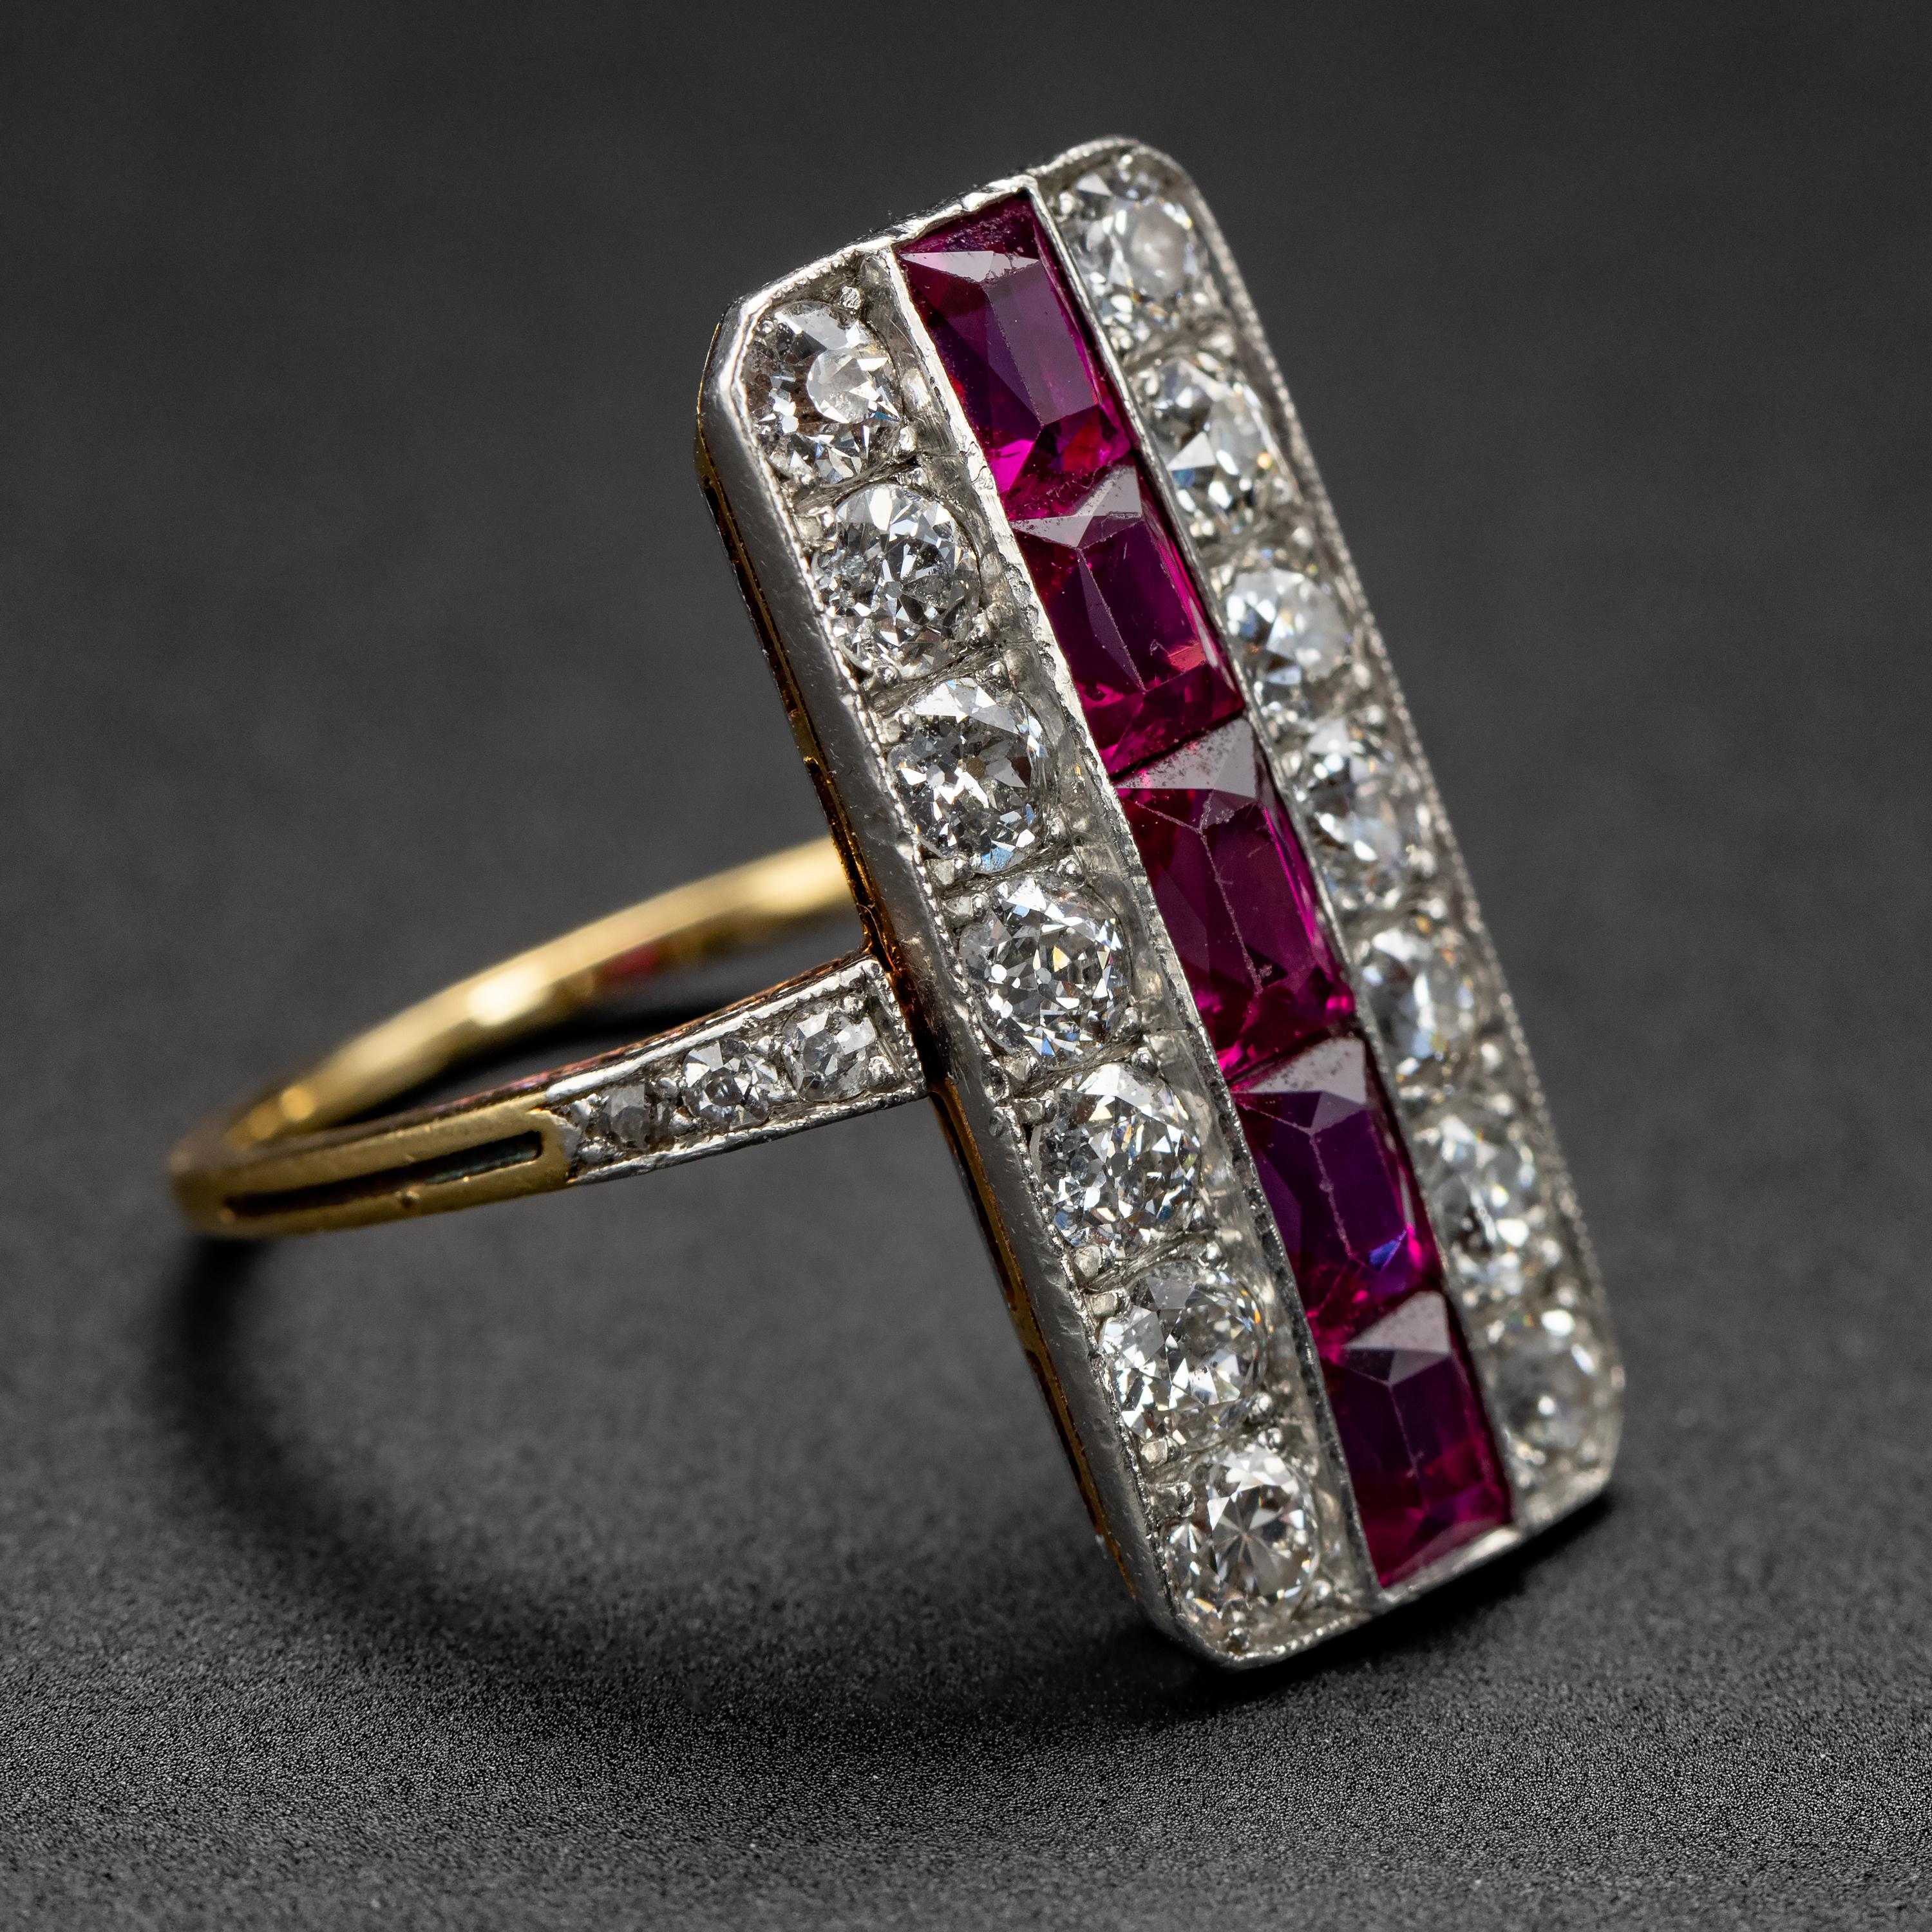 This spectacular Edwardian no-heat Burma ruby and diamond ring features a crisp central row of vivid pinkish-red hand-cut baguette unheated rubies from Burma that total between 2.05 and 2.15 carats, and two rows of bright white and firey eye-clean